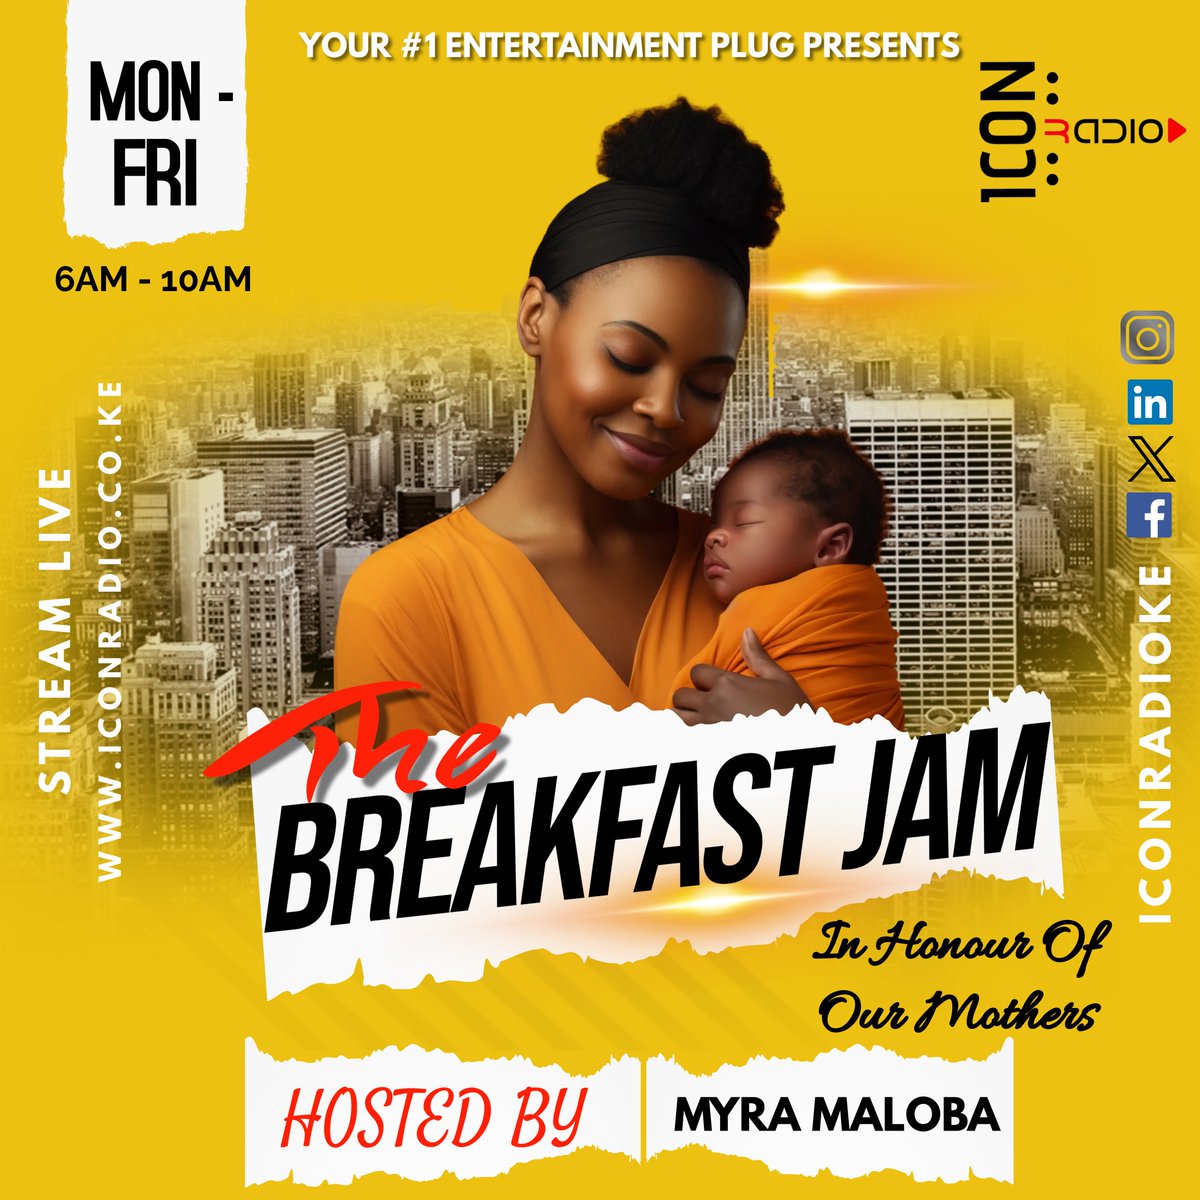 Today's Breakfast Jam is filled with beautiful dedications to our Mother's ❤️. 

Send in a voicenote with a special message and song dedication to your Mom on WhatsApp number +254 788 380030 and we'll be sure to pass the message on live on air 😊

#thebreakfastjam #amotherslove